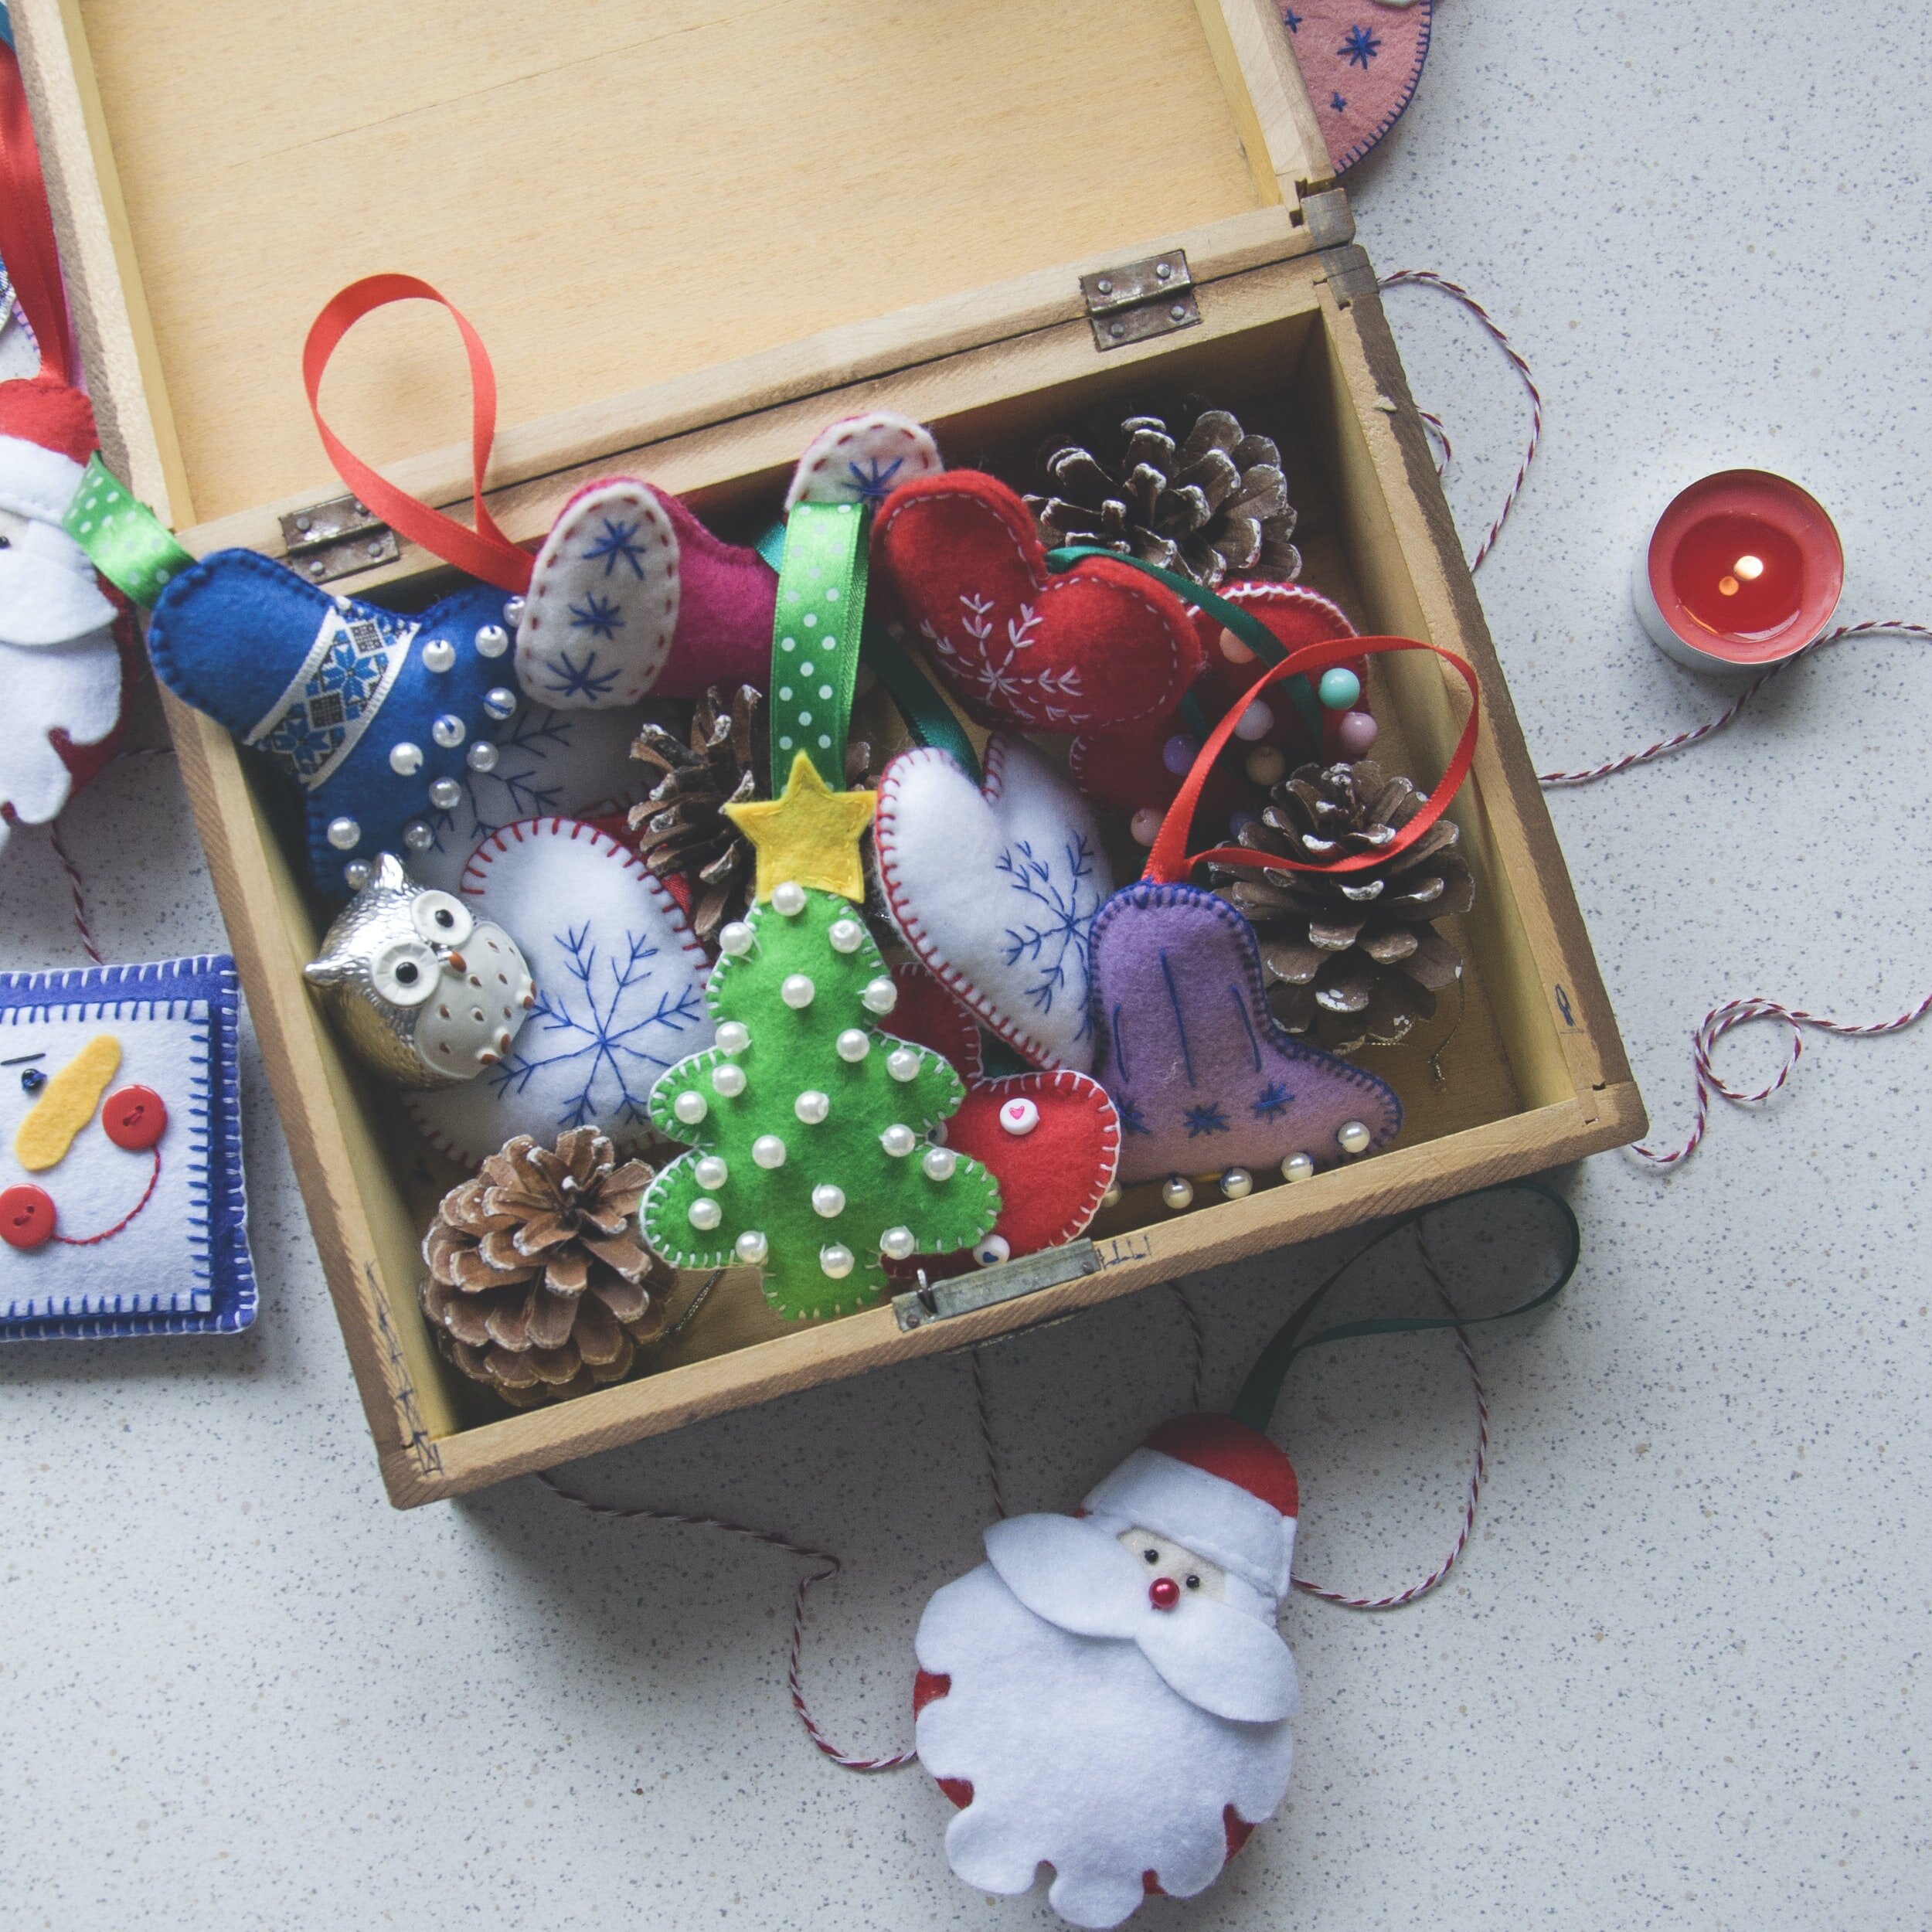 christmas gifts for kids to make for parents